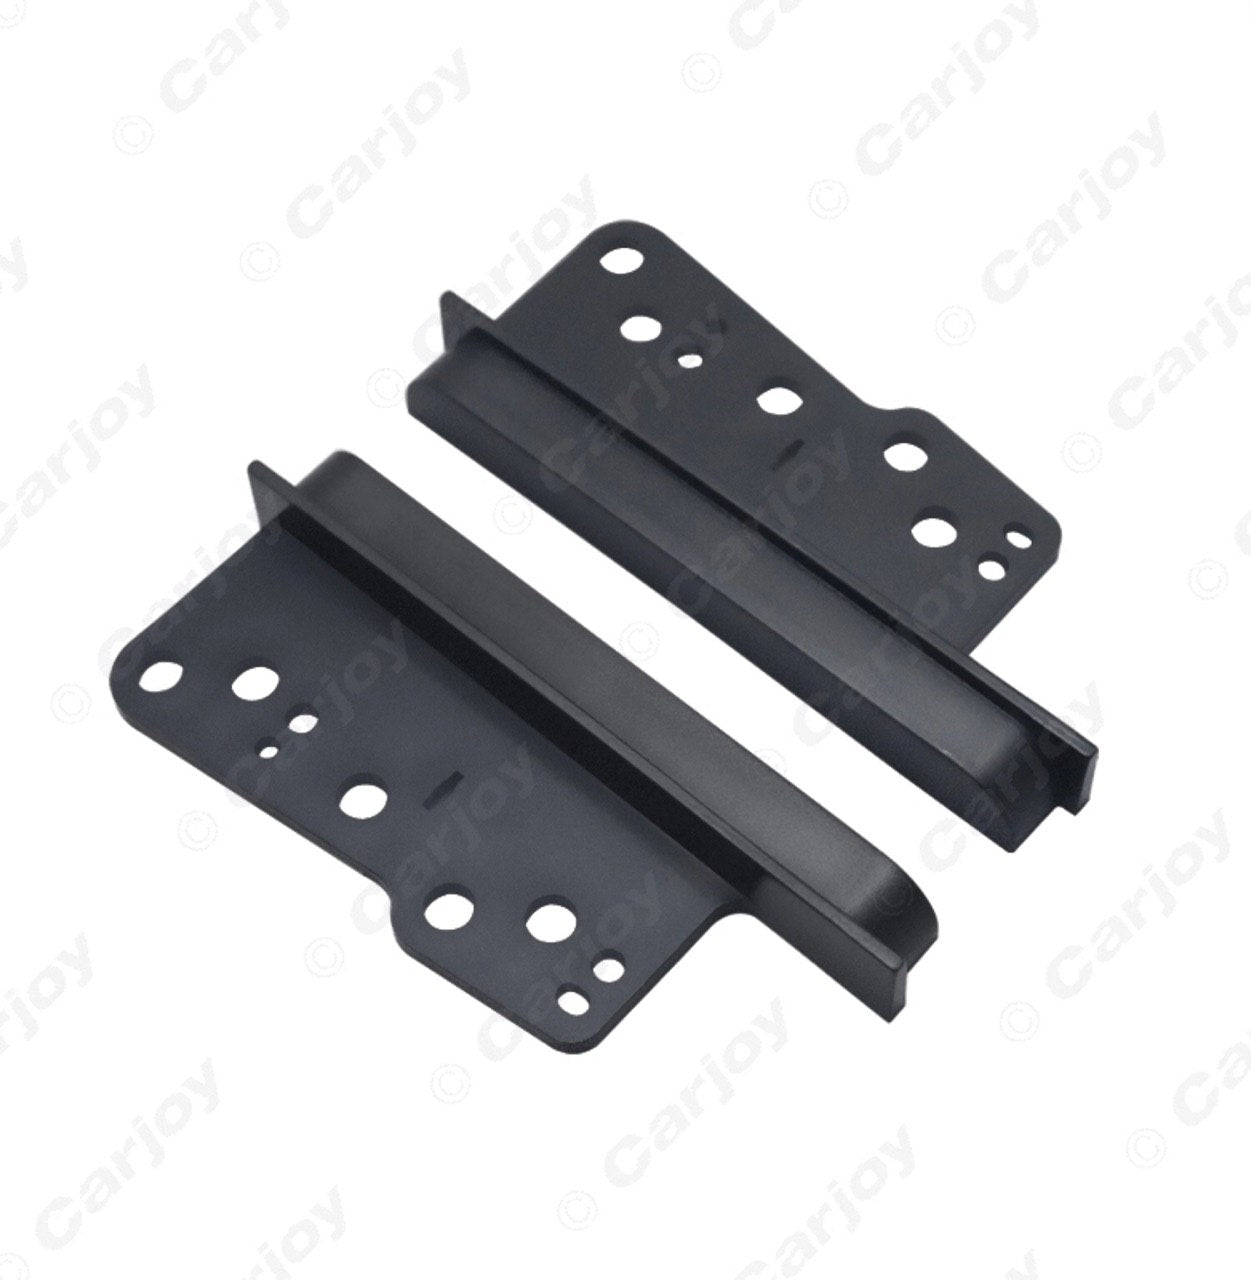 Compatible with Toyota Stereo Kit Wiring Harness + Trim Side Brackets Compatible with TOYOTA, LEXUS